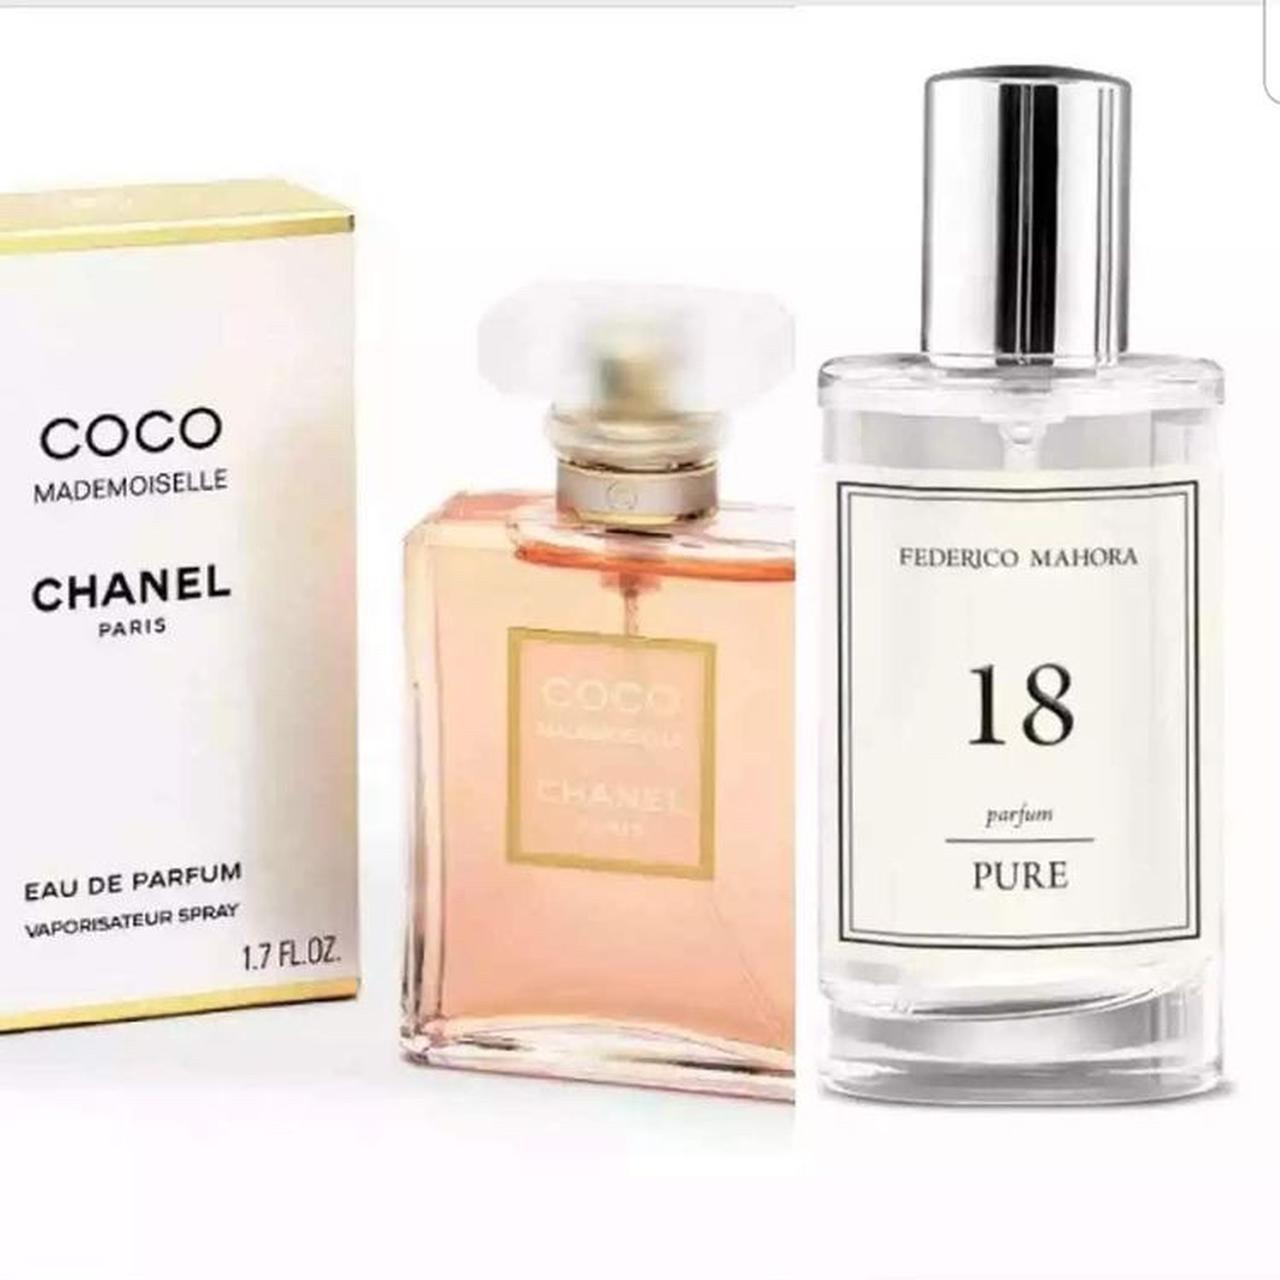 FM Fragrance with Fliss - 💐 FM18 Inspired by Chanel Coco Mademoiselle  Comes In A Wide Variety Of Items To Keep You And Your Home Smelling Great  💐 Message Me To Order 🥰